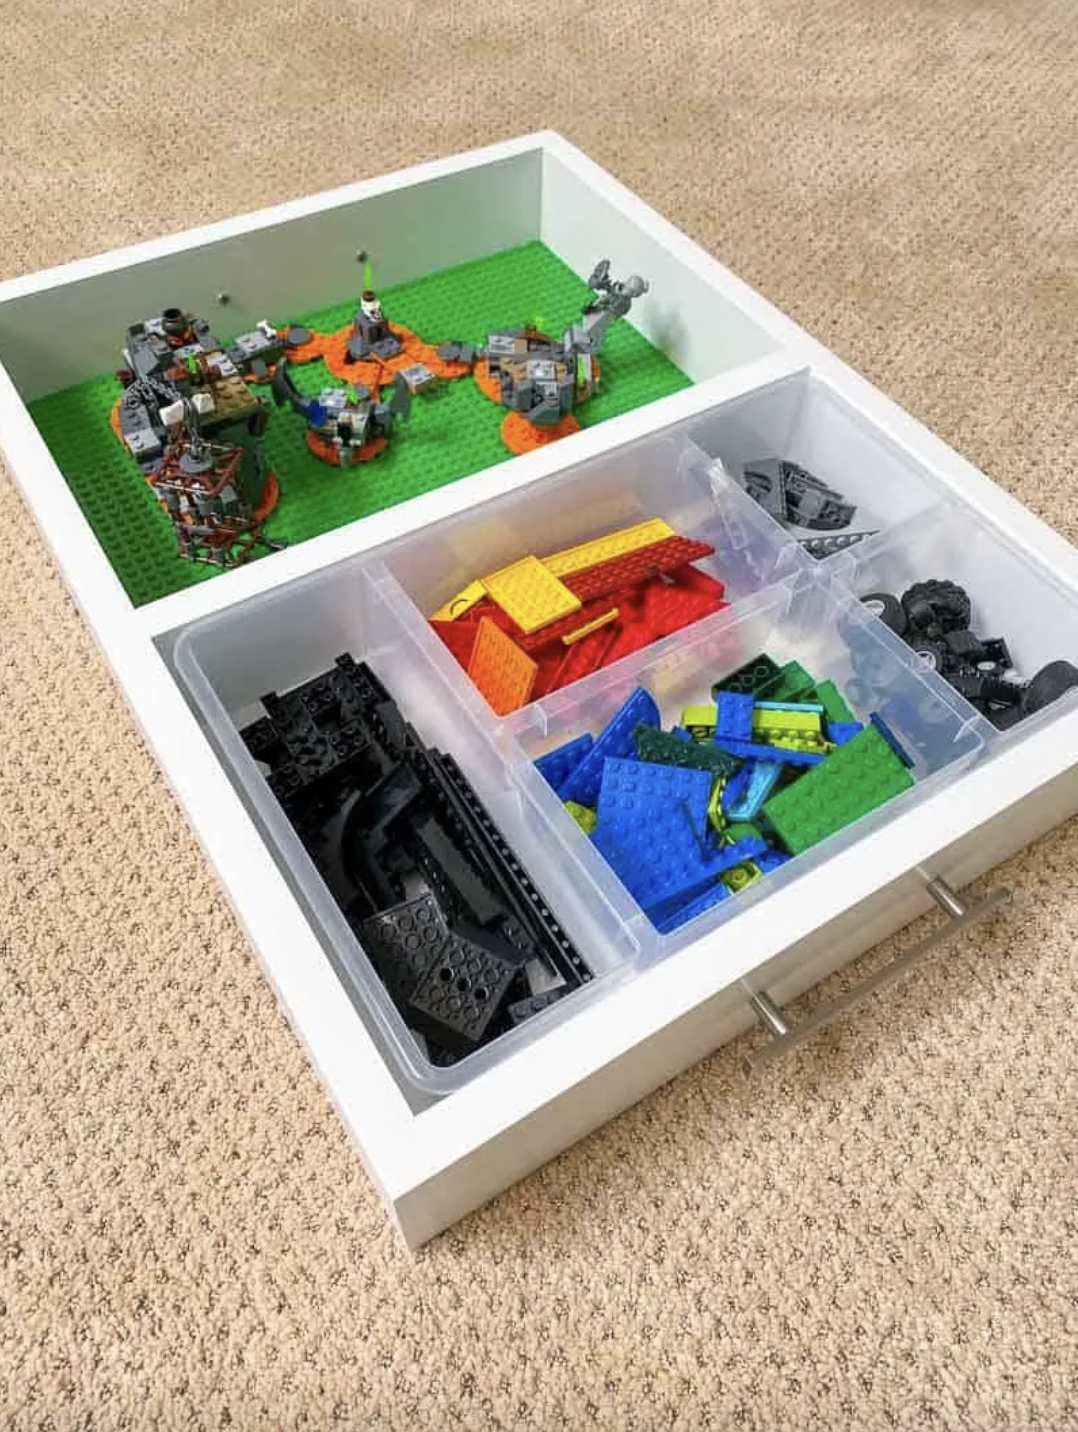 DIY Lego Head Storage Container - Meatloaf and Melodrama